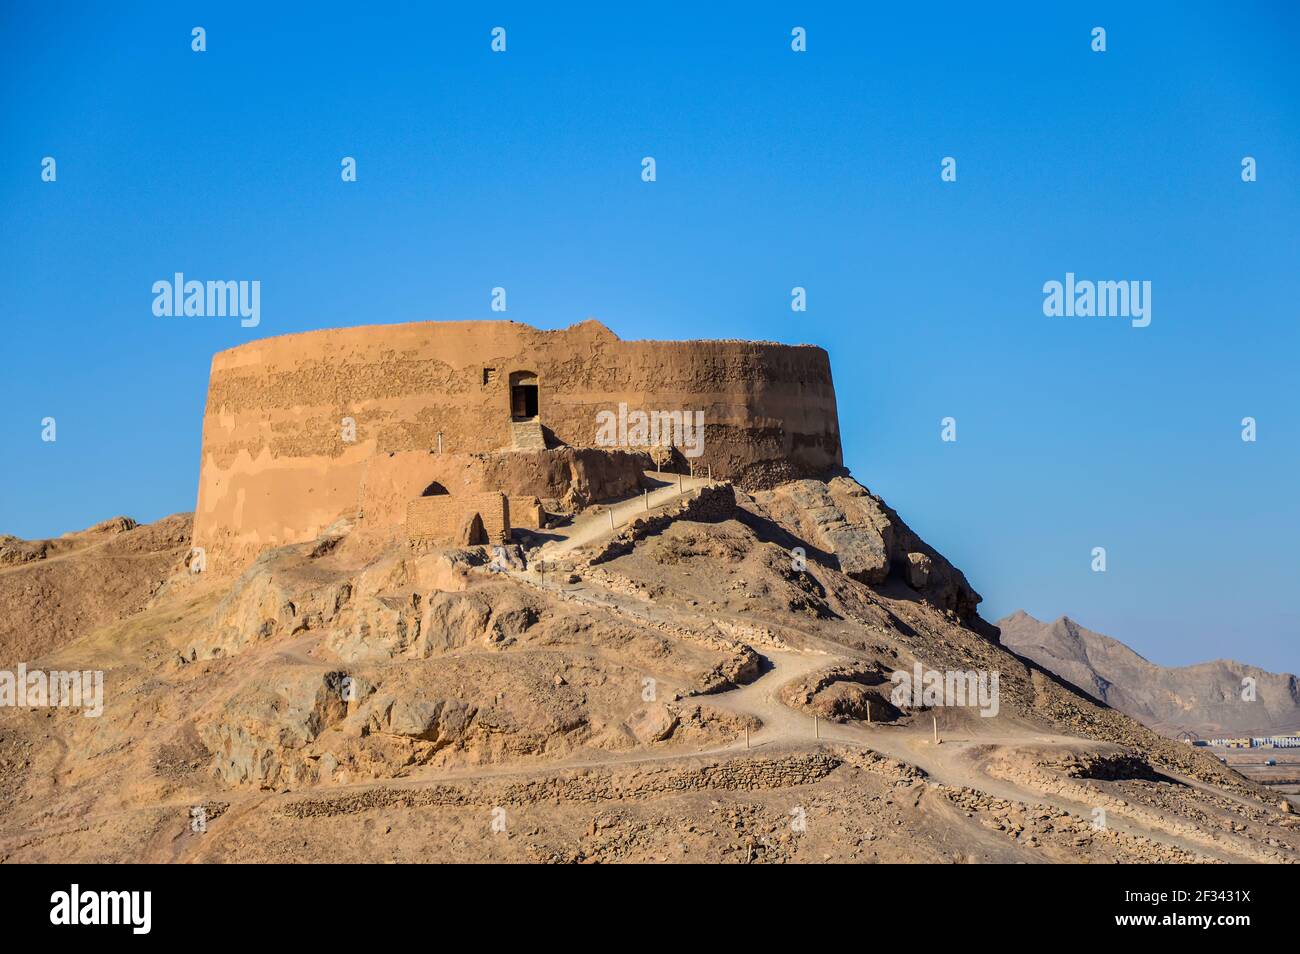 Yazd, Iran - December 5, 2015: Dakhme, or a Tower of Silence, traditional Zoroastrian burial grounds in Yazd, Iran Stock Photo